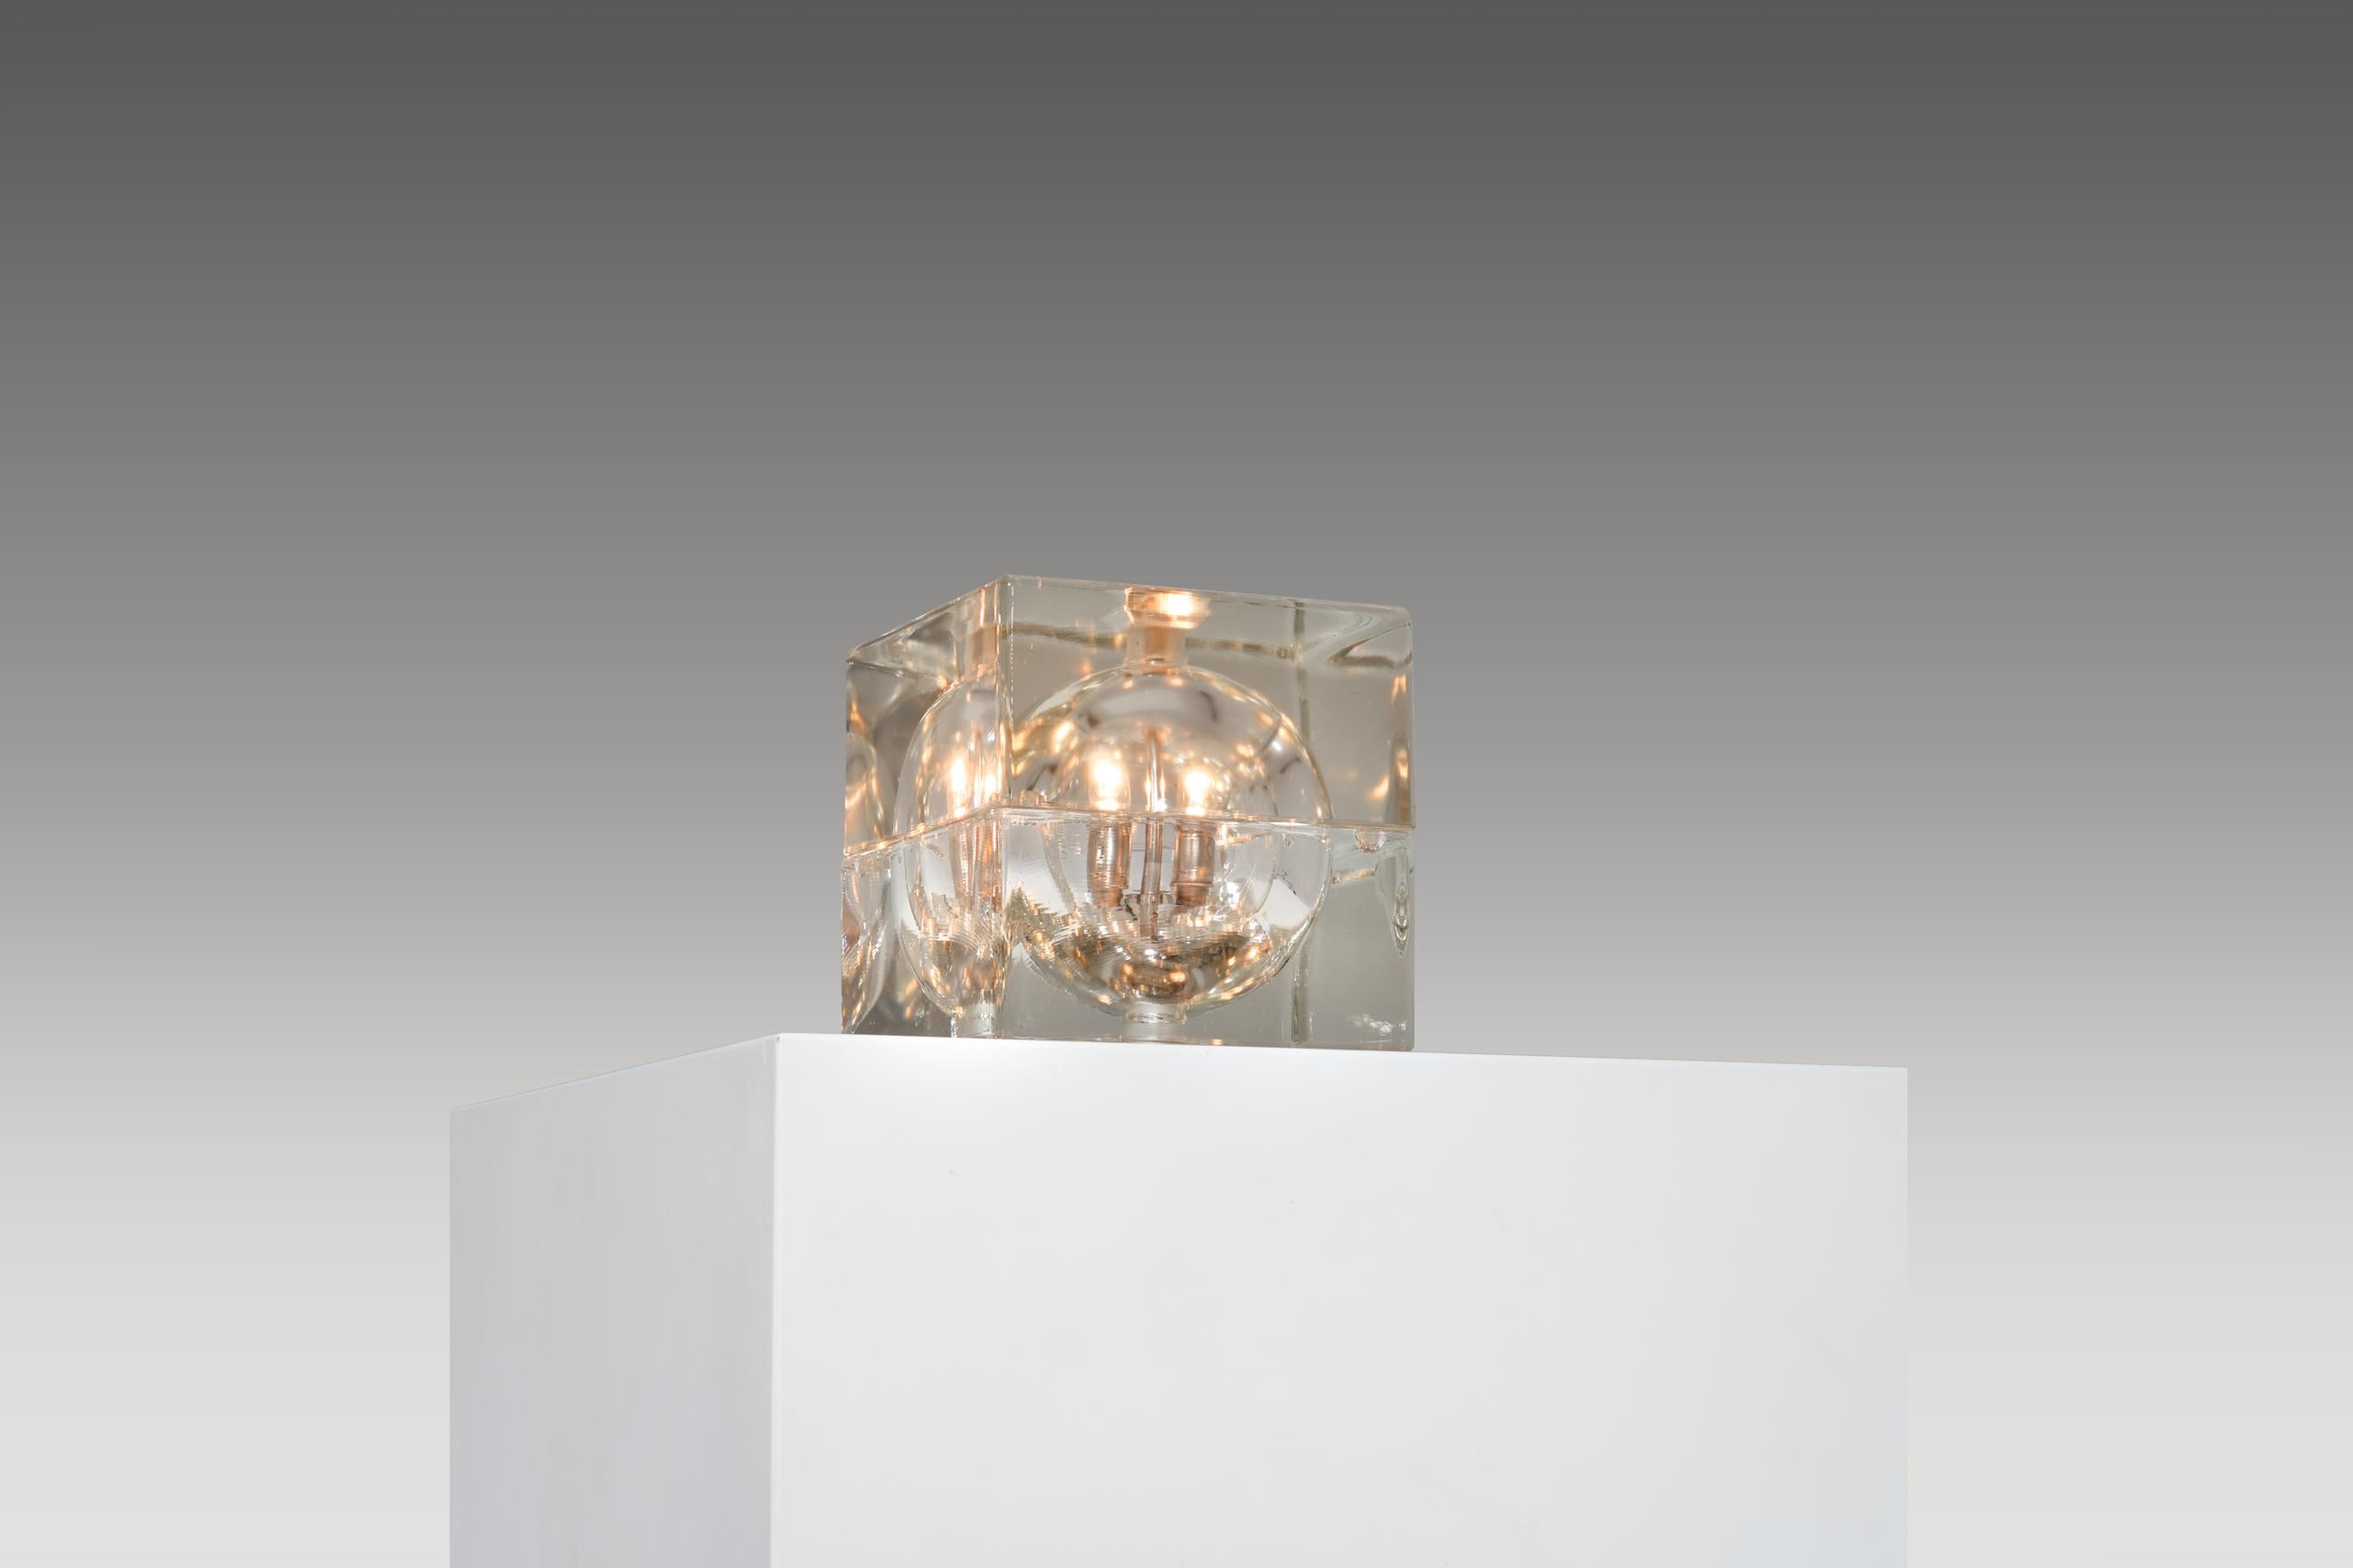 ‘Cubosfera’ table lamp by Allesandro Mendini
An impressive design with strong primary shapes; cubo, sphere (cube, sphere) made in solid clear glass with nice sophisticated metal details. The top and bottom part together form a cube with a globe